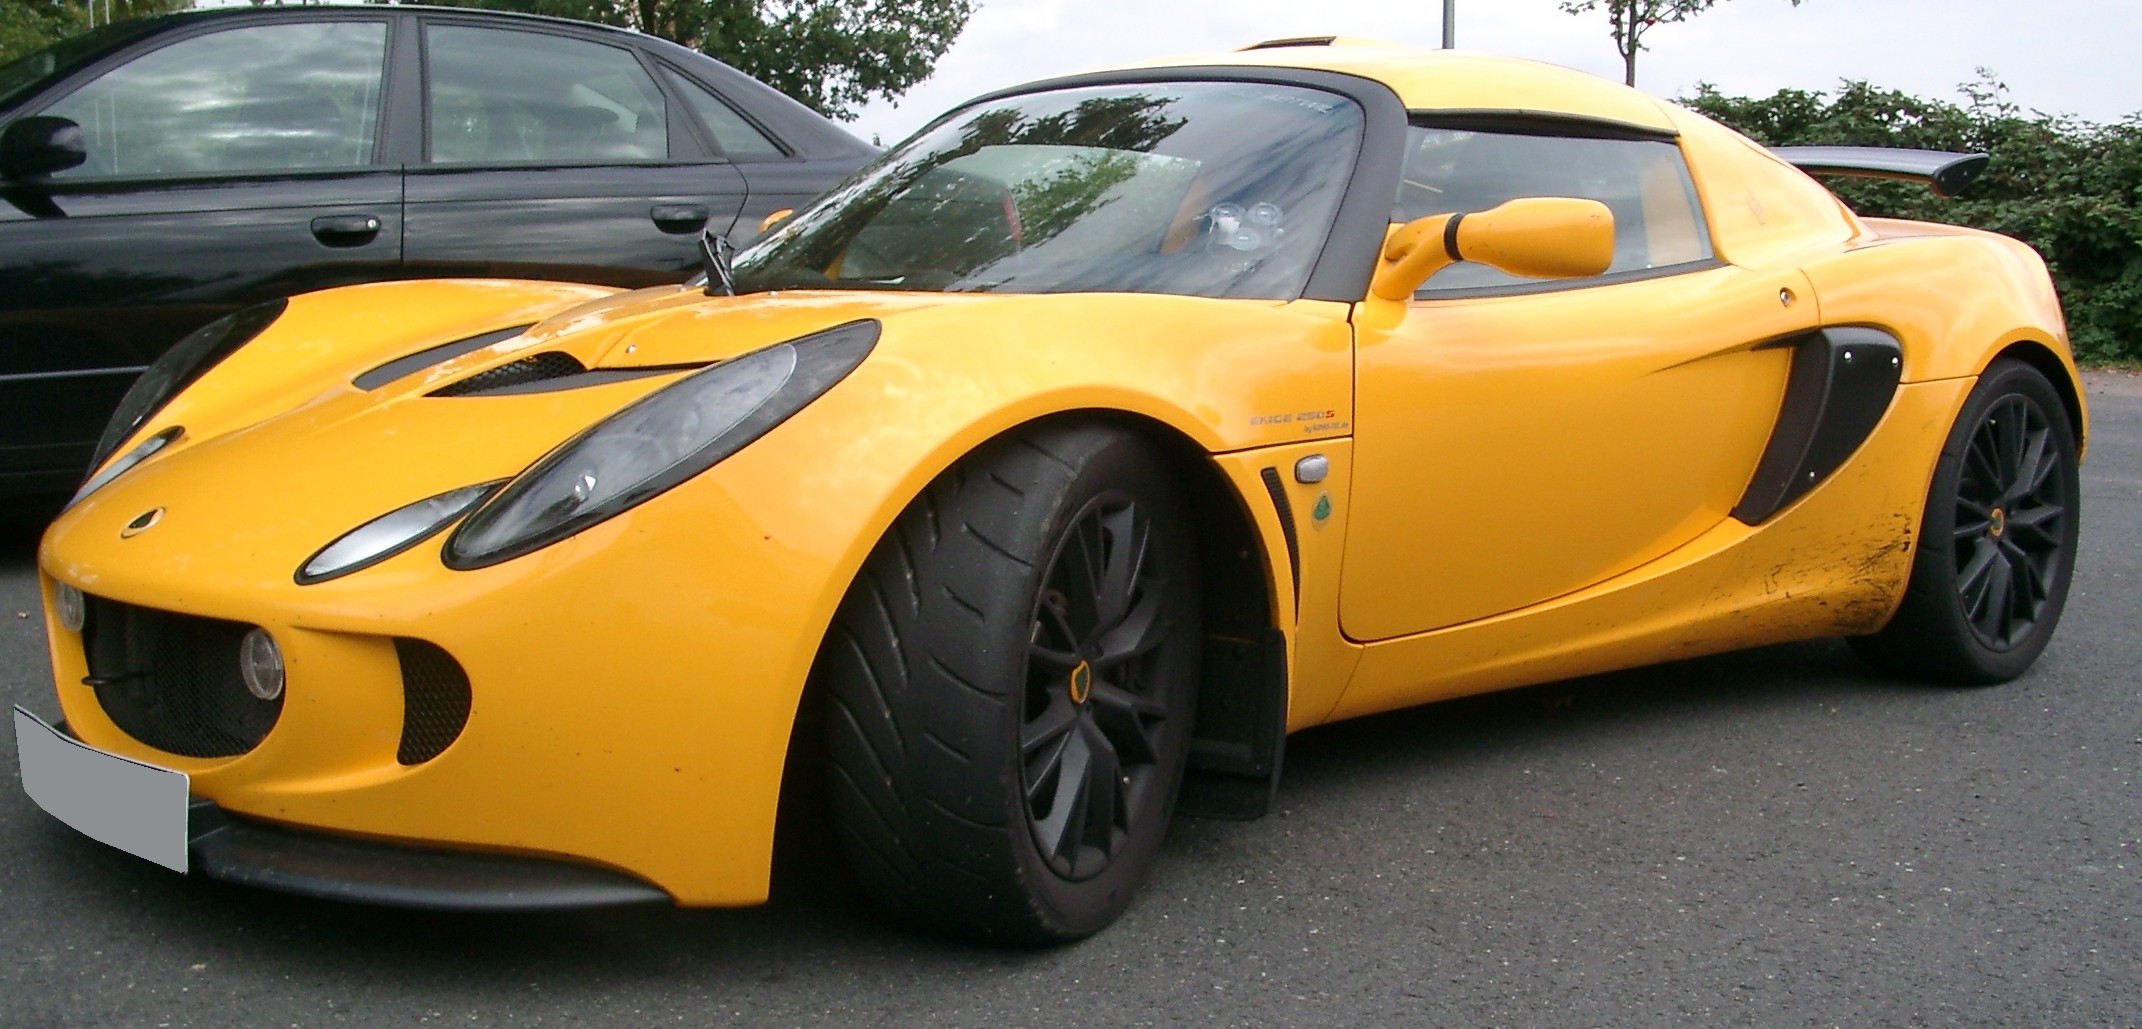 File:Lotus Exige front 20070912.jpg - Wikimedia Commons